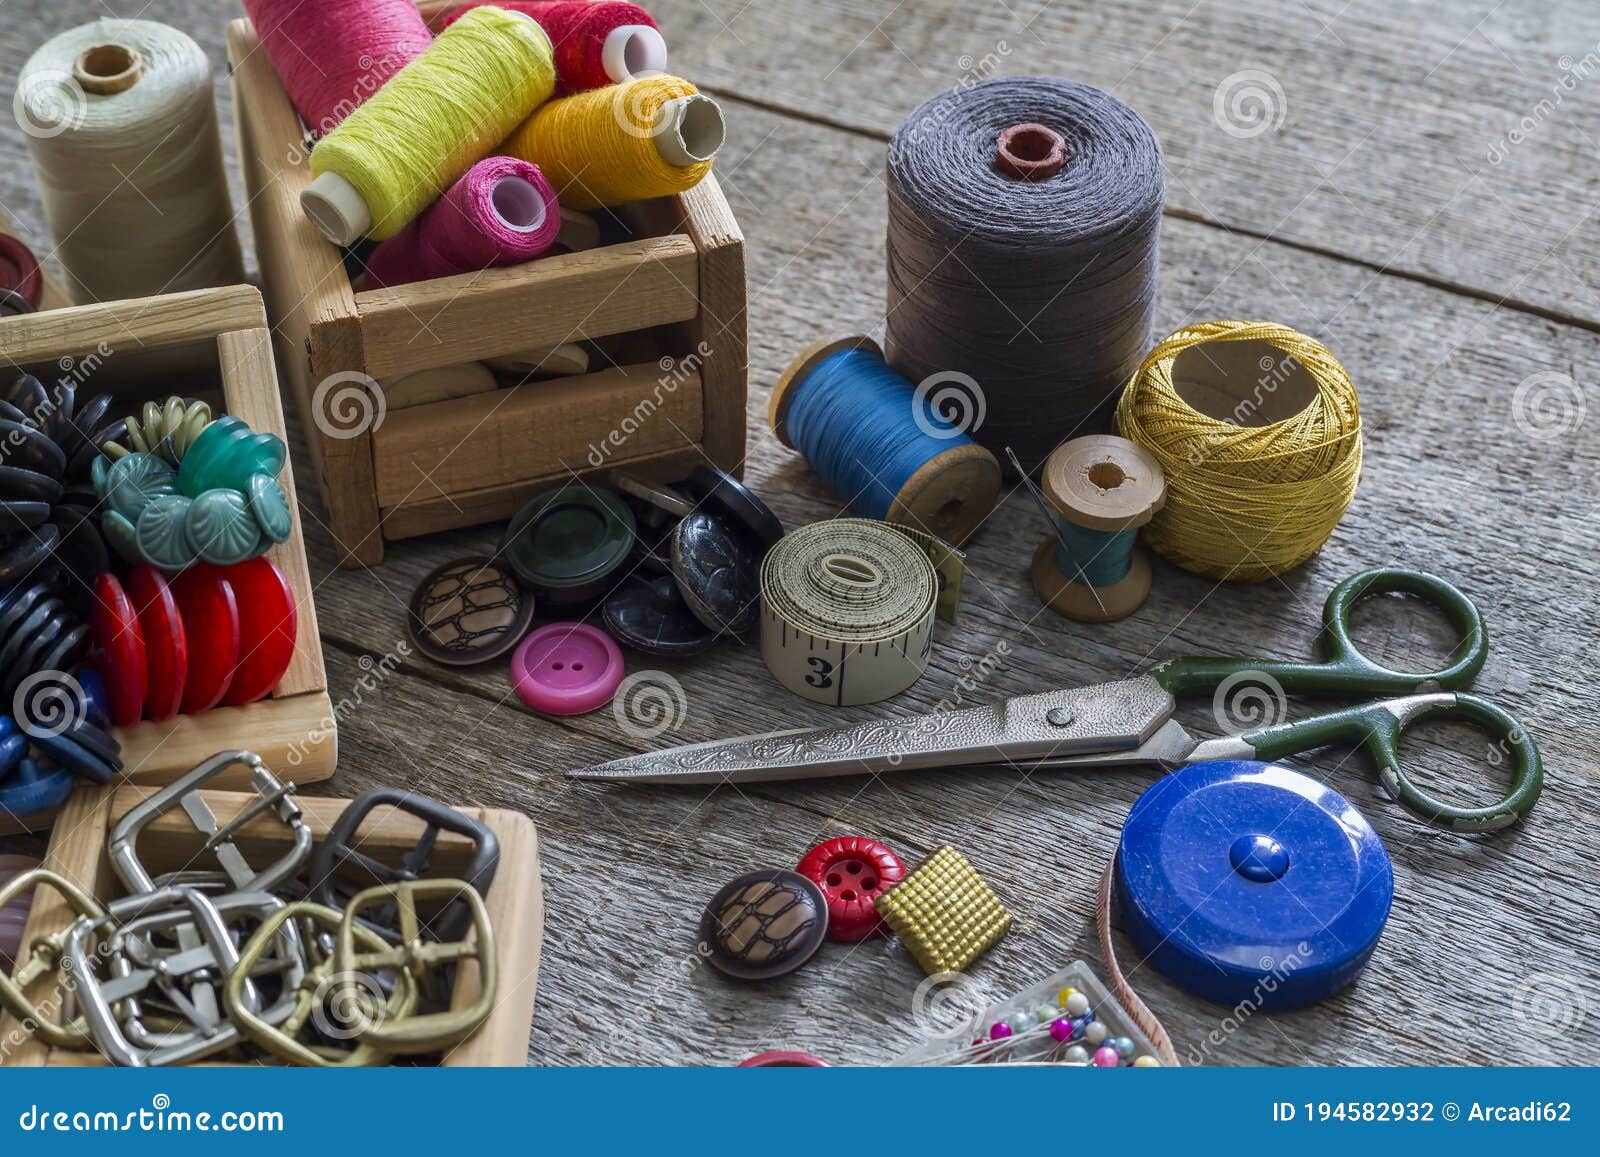 Old Sewing Accessories and Tools Stock Photo - Image of fashion